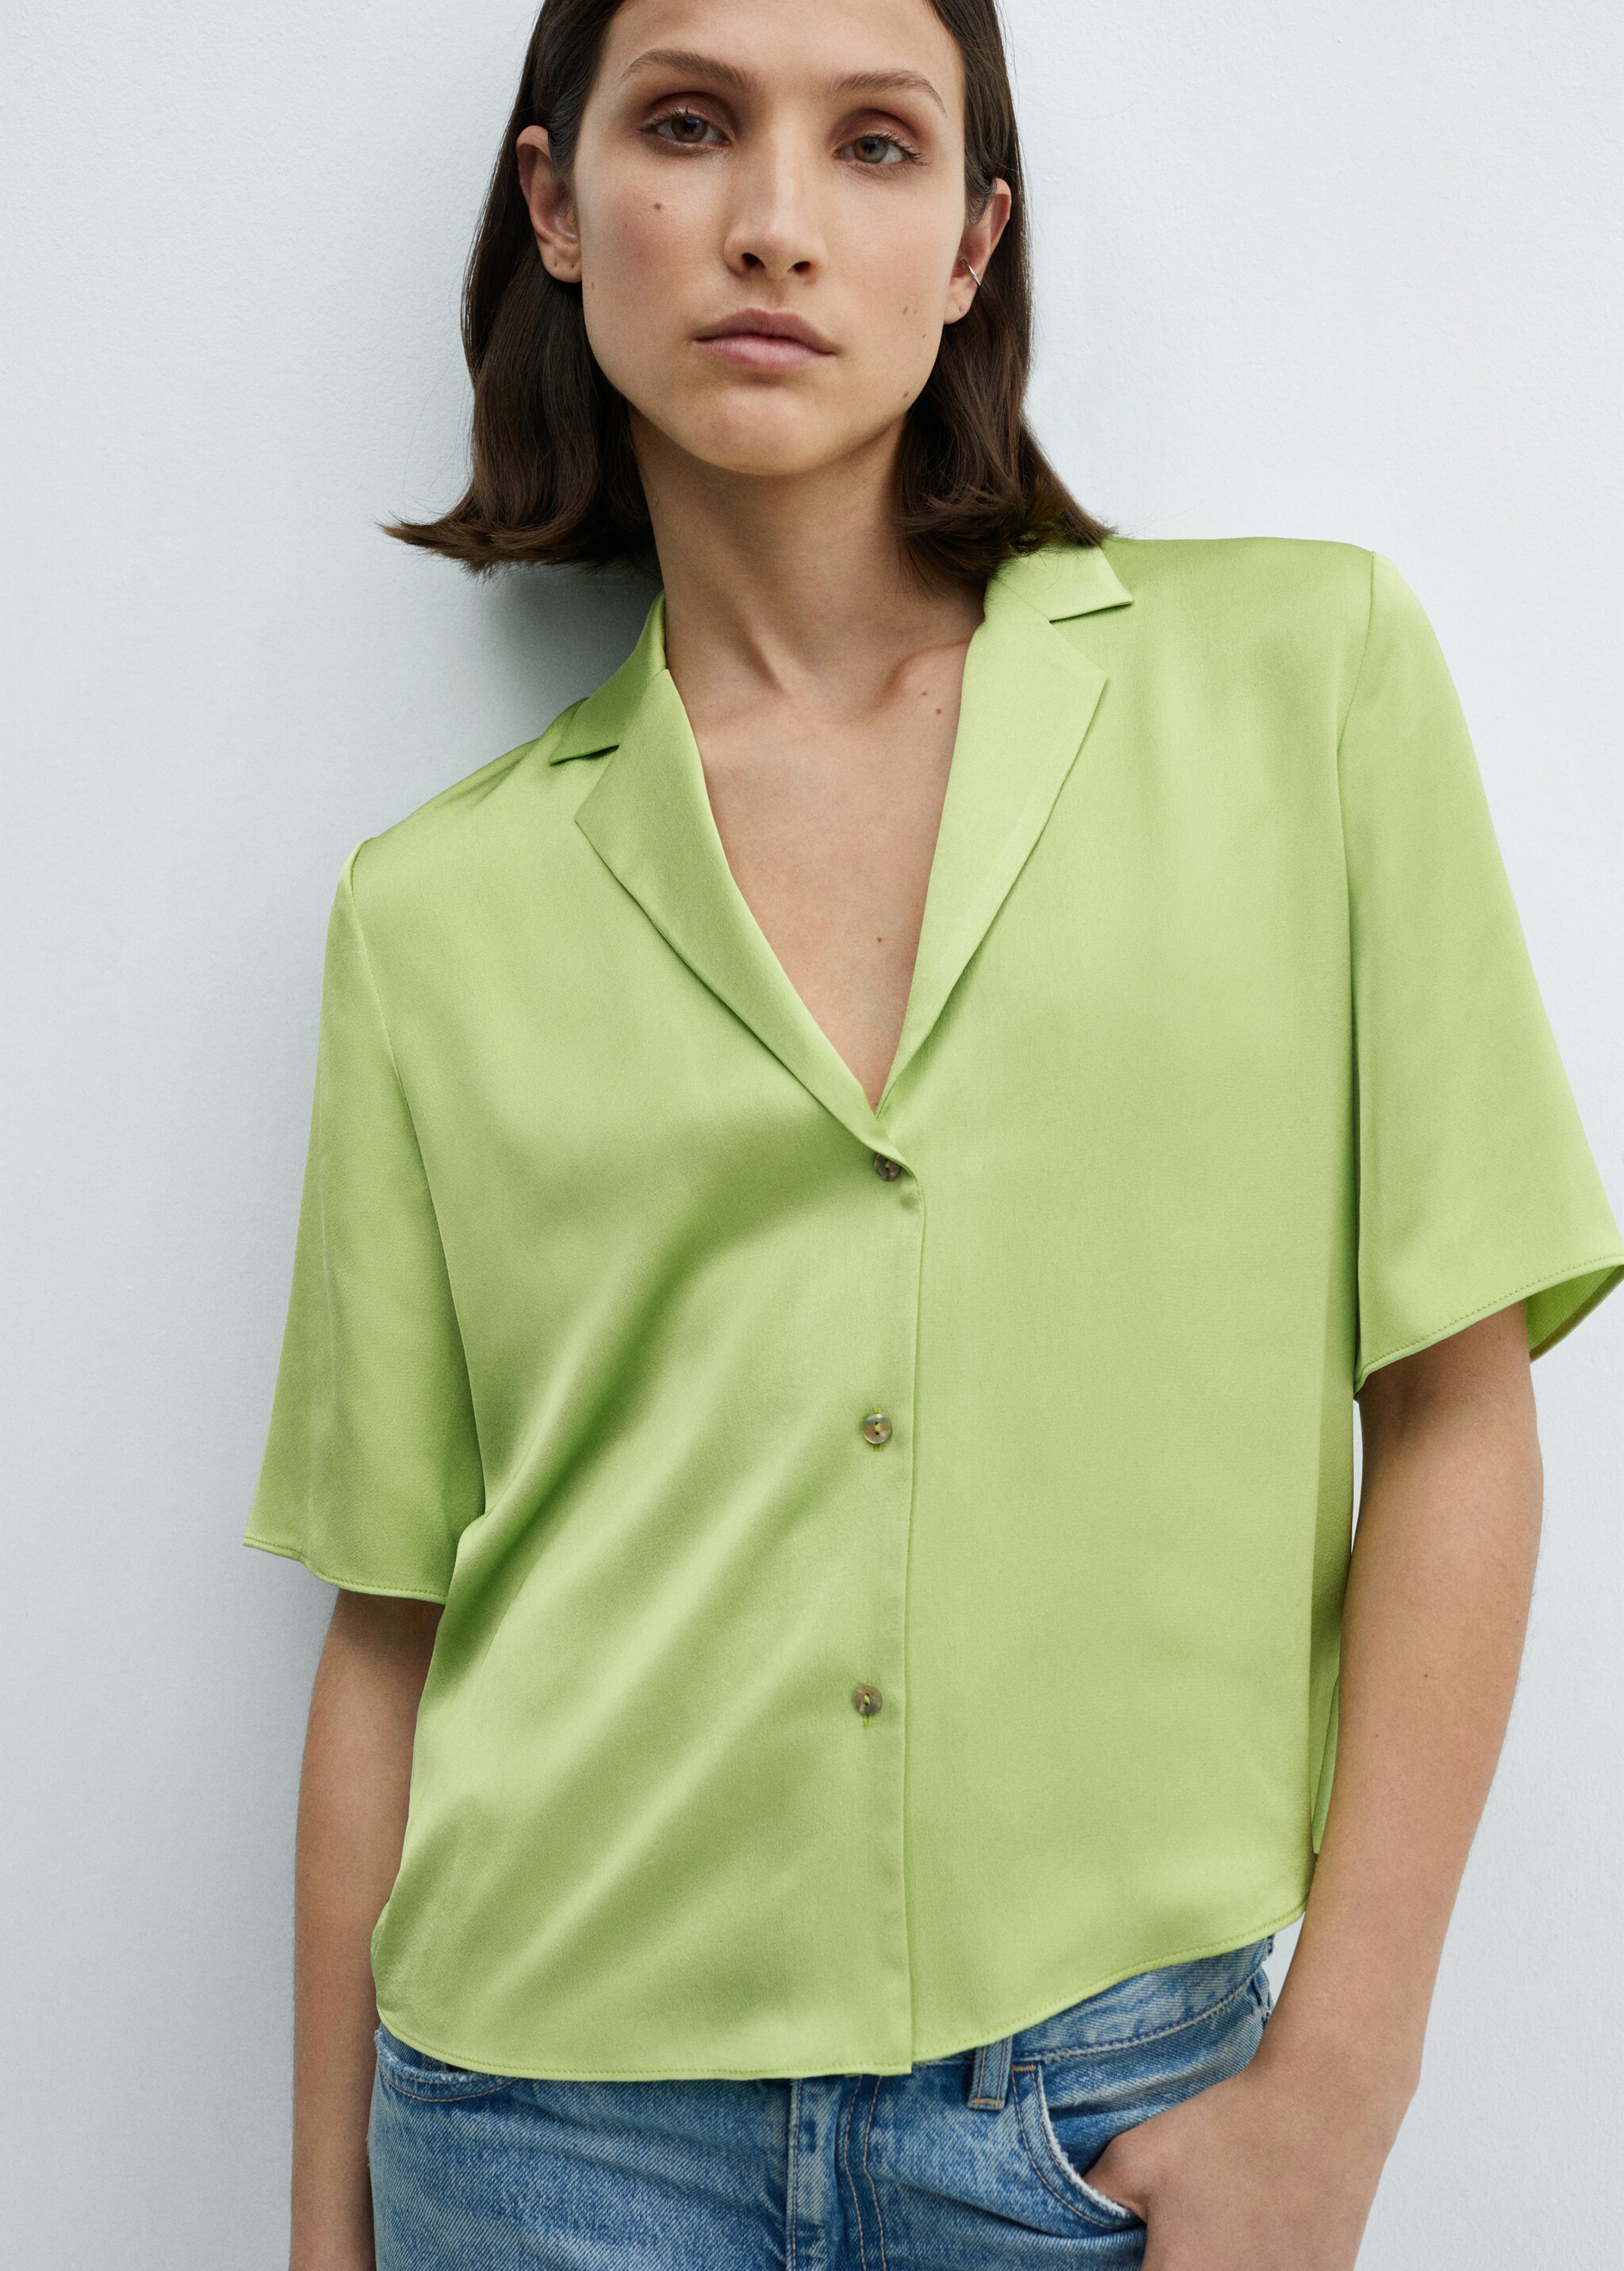 Short-sleeved satin shirt - Details of the article 1